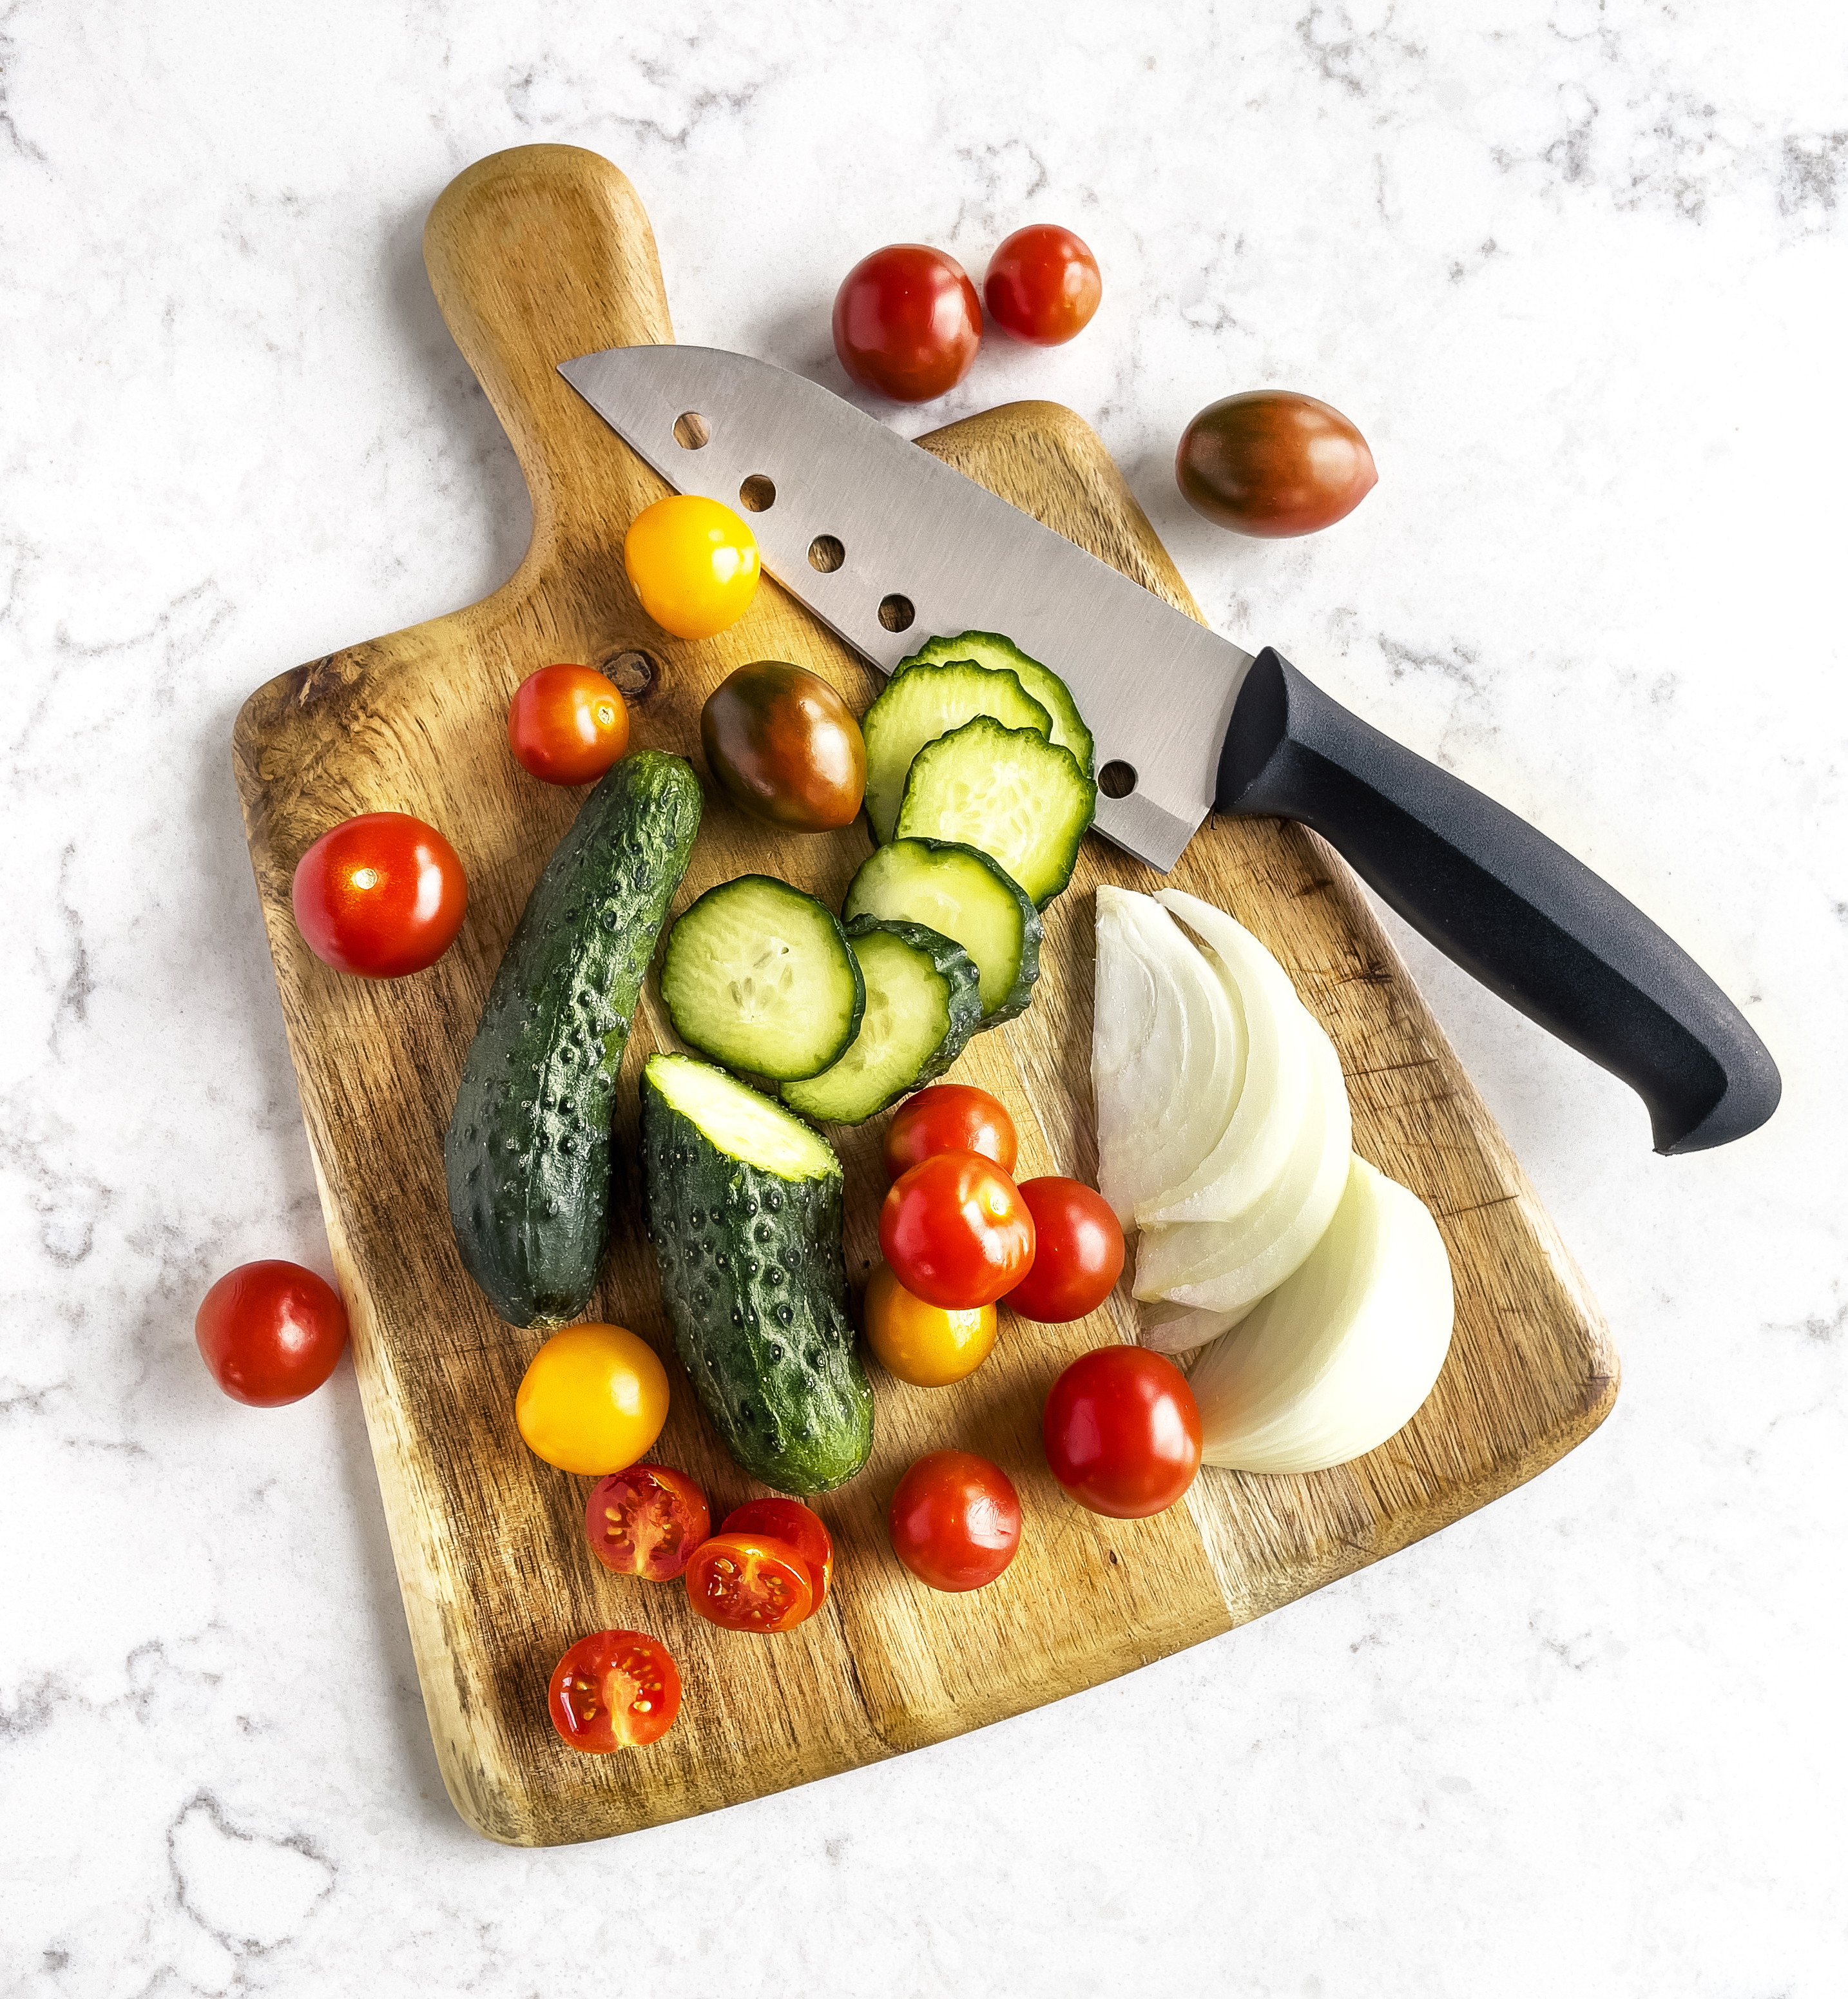 Kitchen Knife Safety & Expert Tips for Cutting Produce